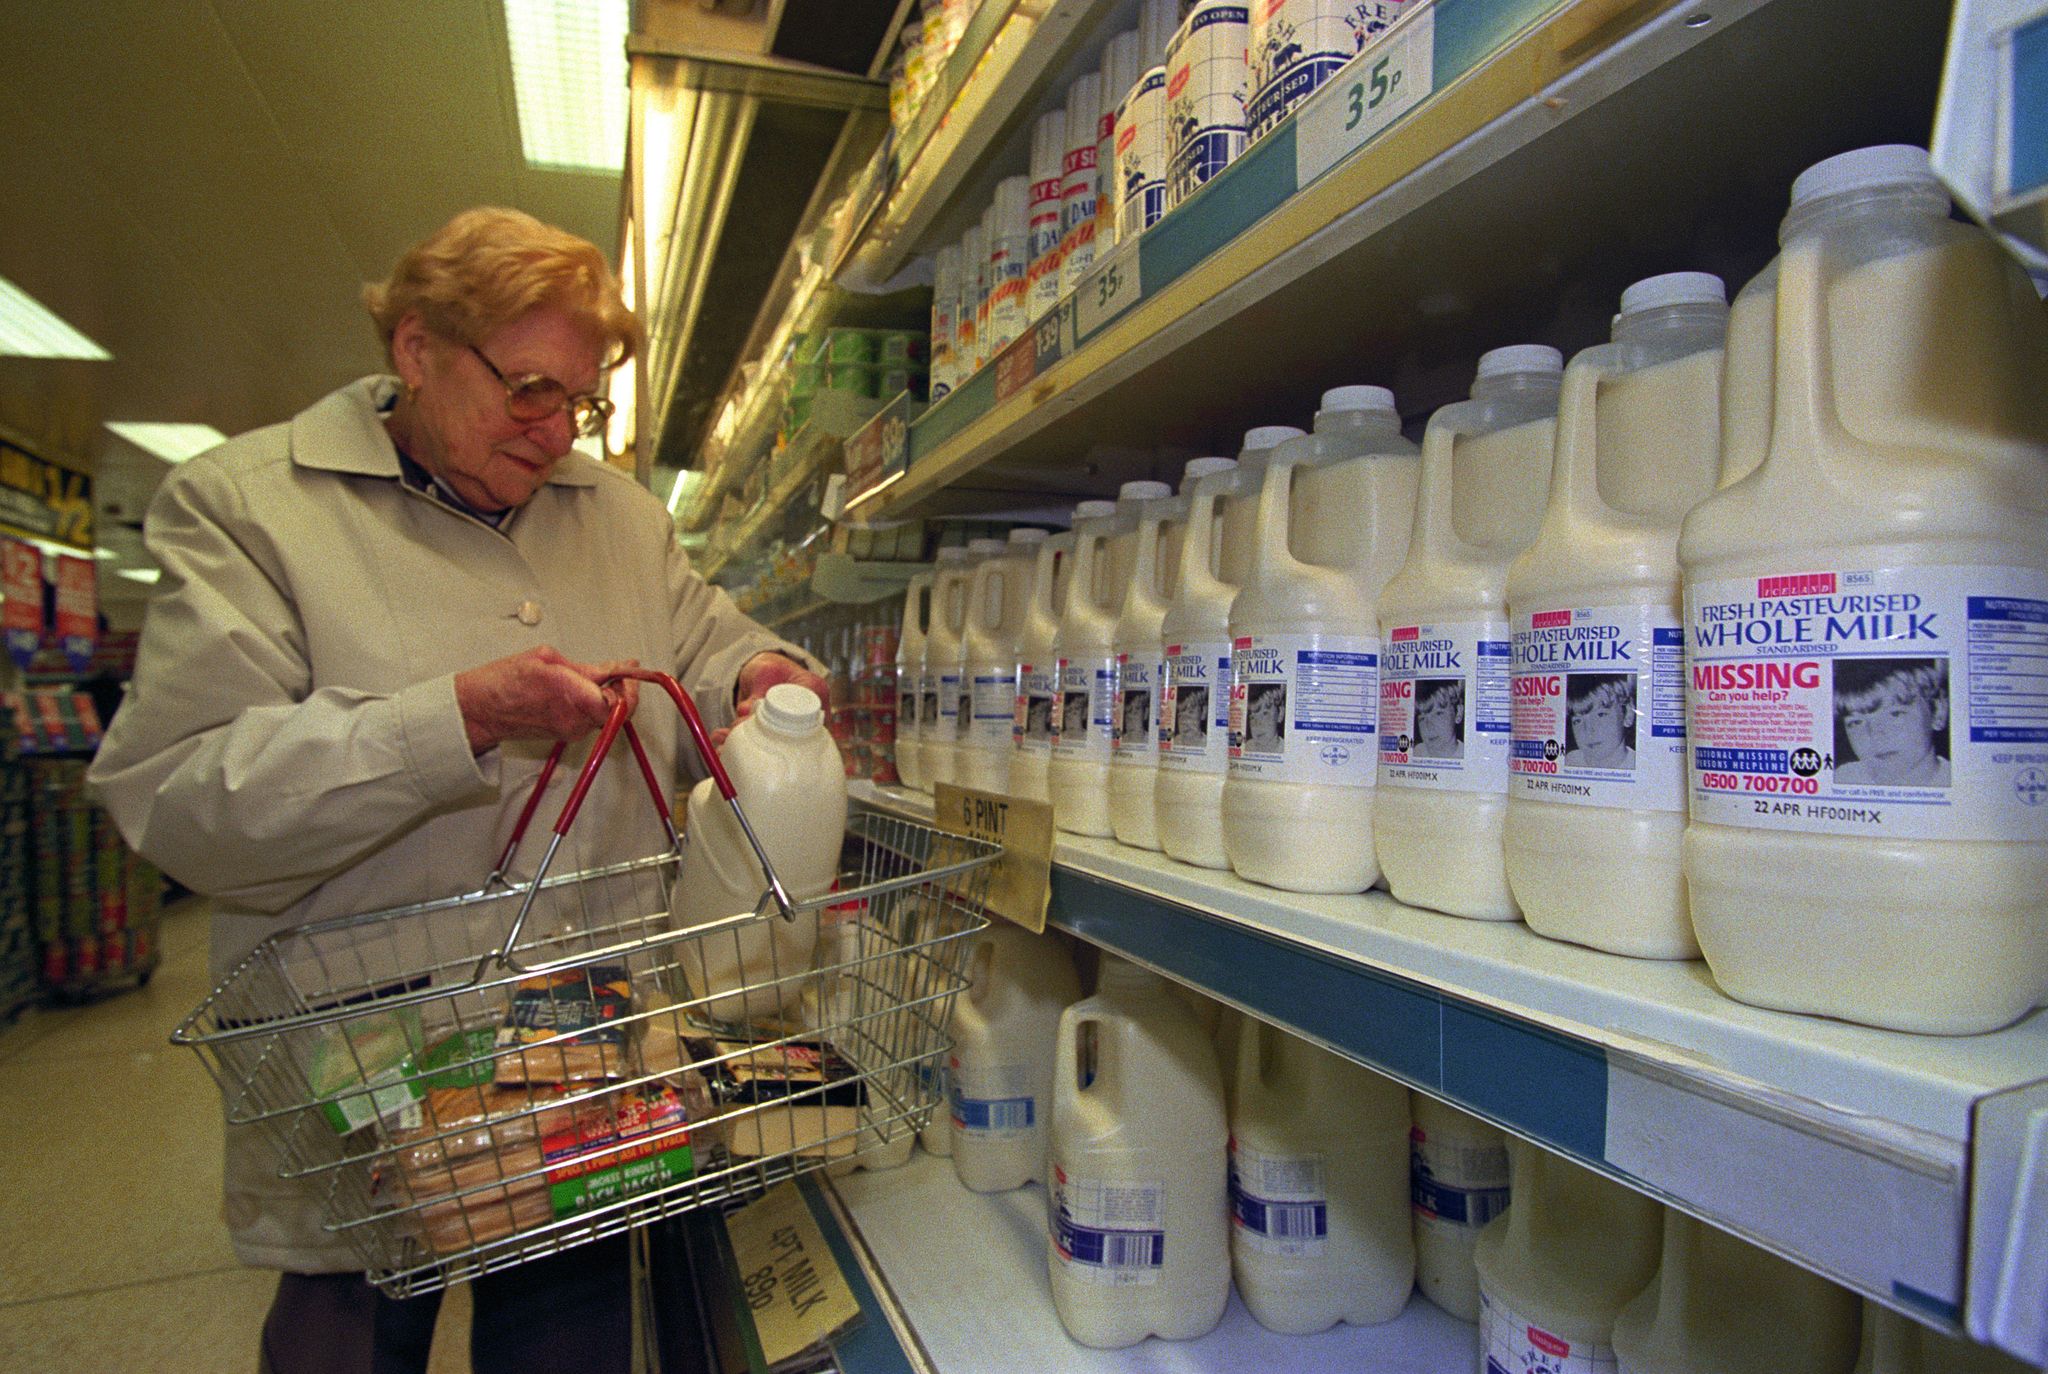 A shopper in Iceland buying a 4 pint milk carton which displays a picture of missing children | Source: Getty Images